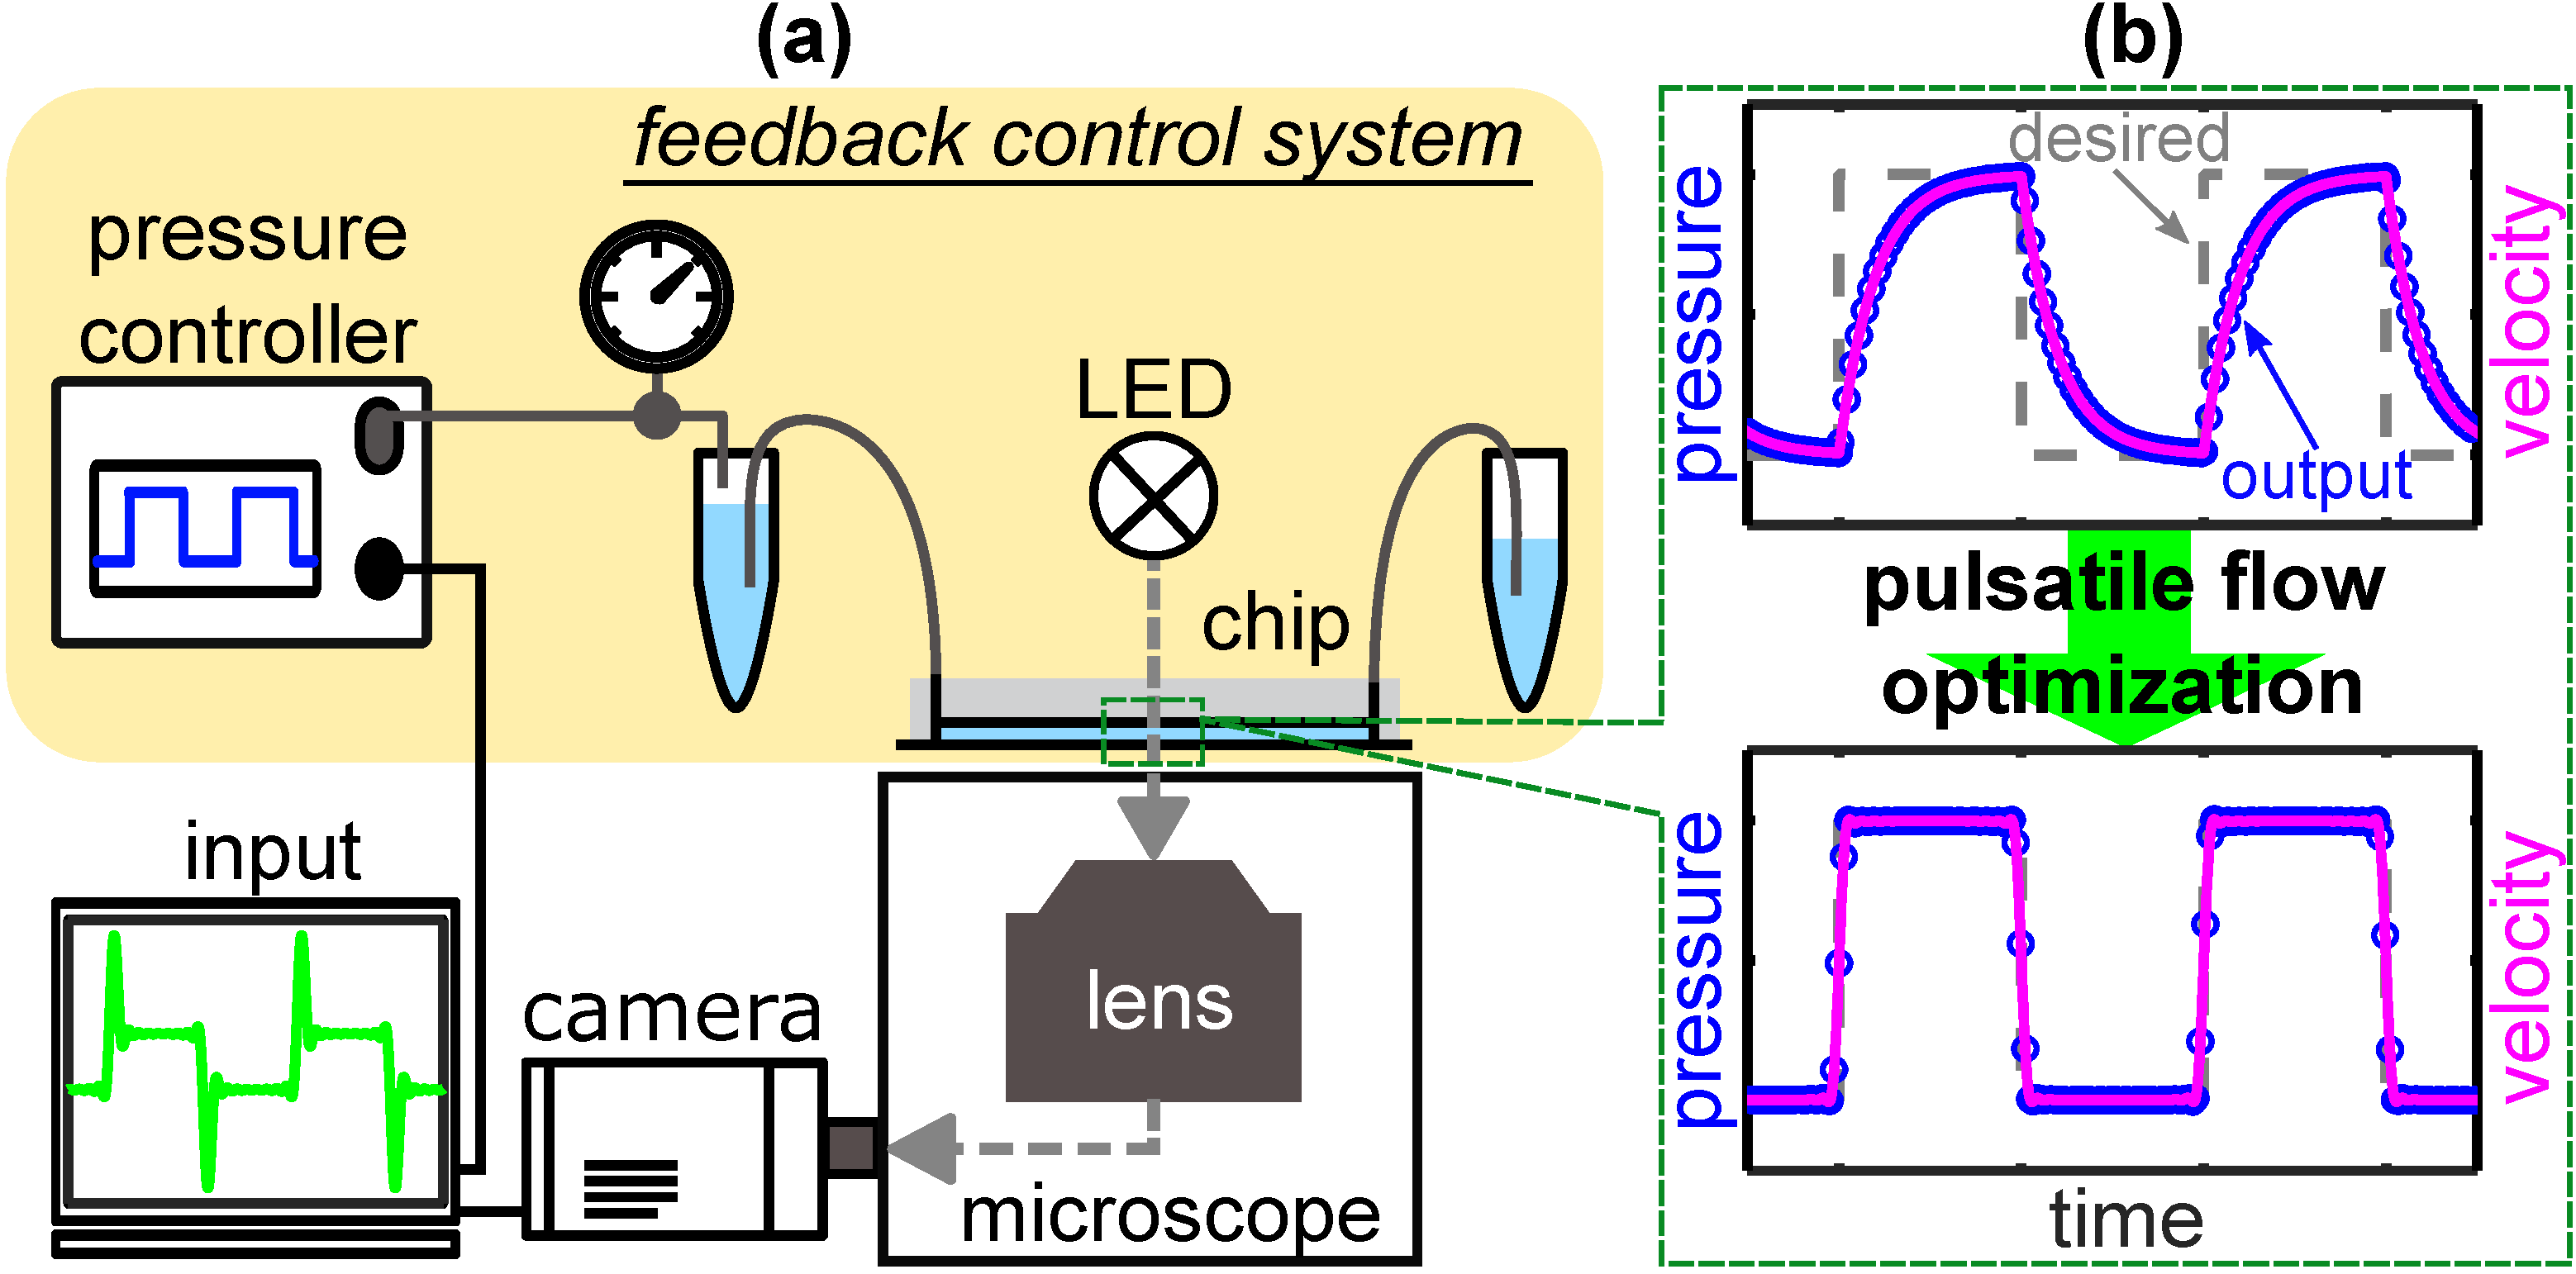 (a) Schematic representation of the microfluidic setup. The feedback control system consists of the pressure controller and sensor, the tubing, the sample containers, and the microfluidic chip. The effect of the optimization approach is schematically shown in (b). While the non-optimized device output pressure deviates from the desired waveform (top), the optimization approach enhances the time-dependent pressure output and hence the flow velocity in the microfluidic chip (bottom).